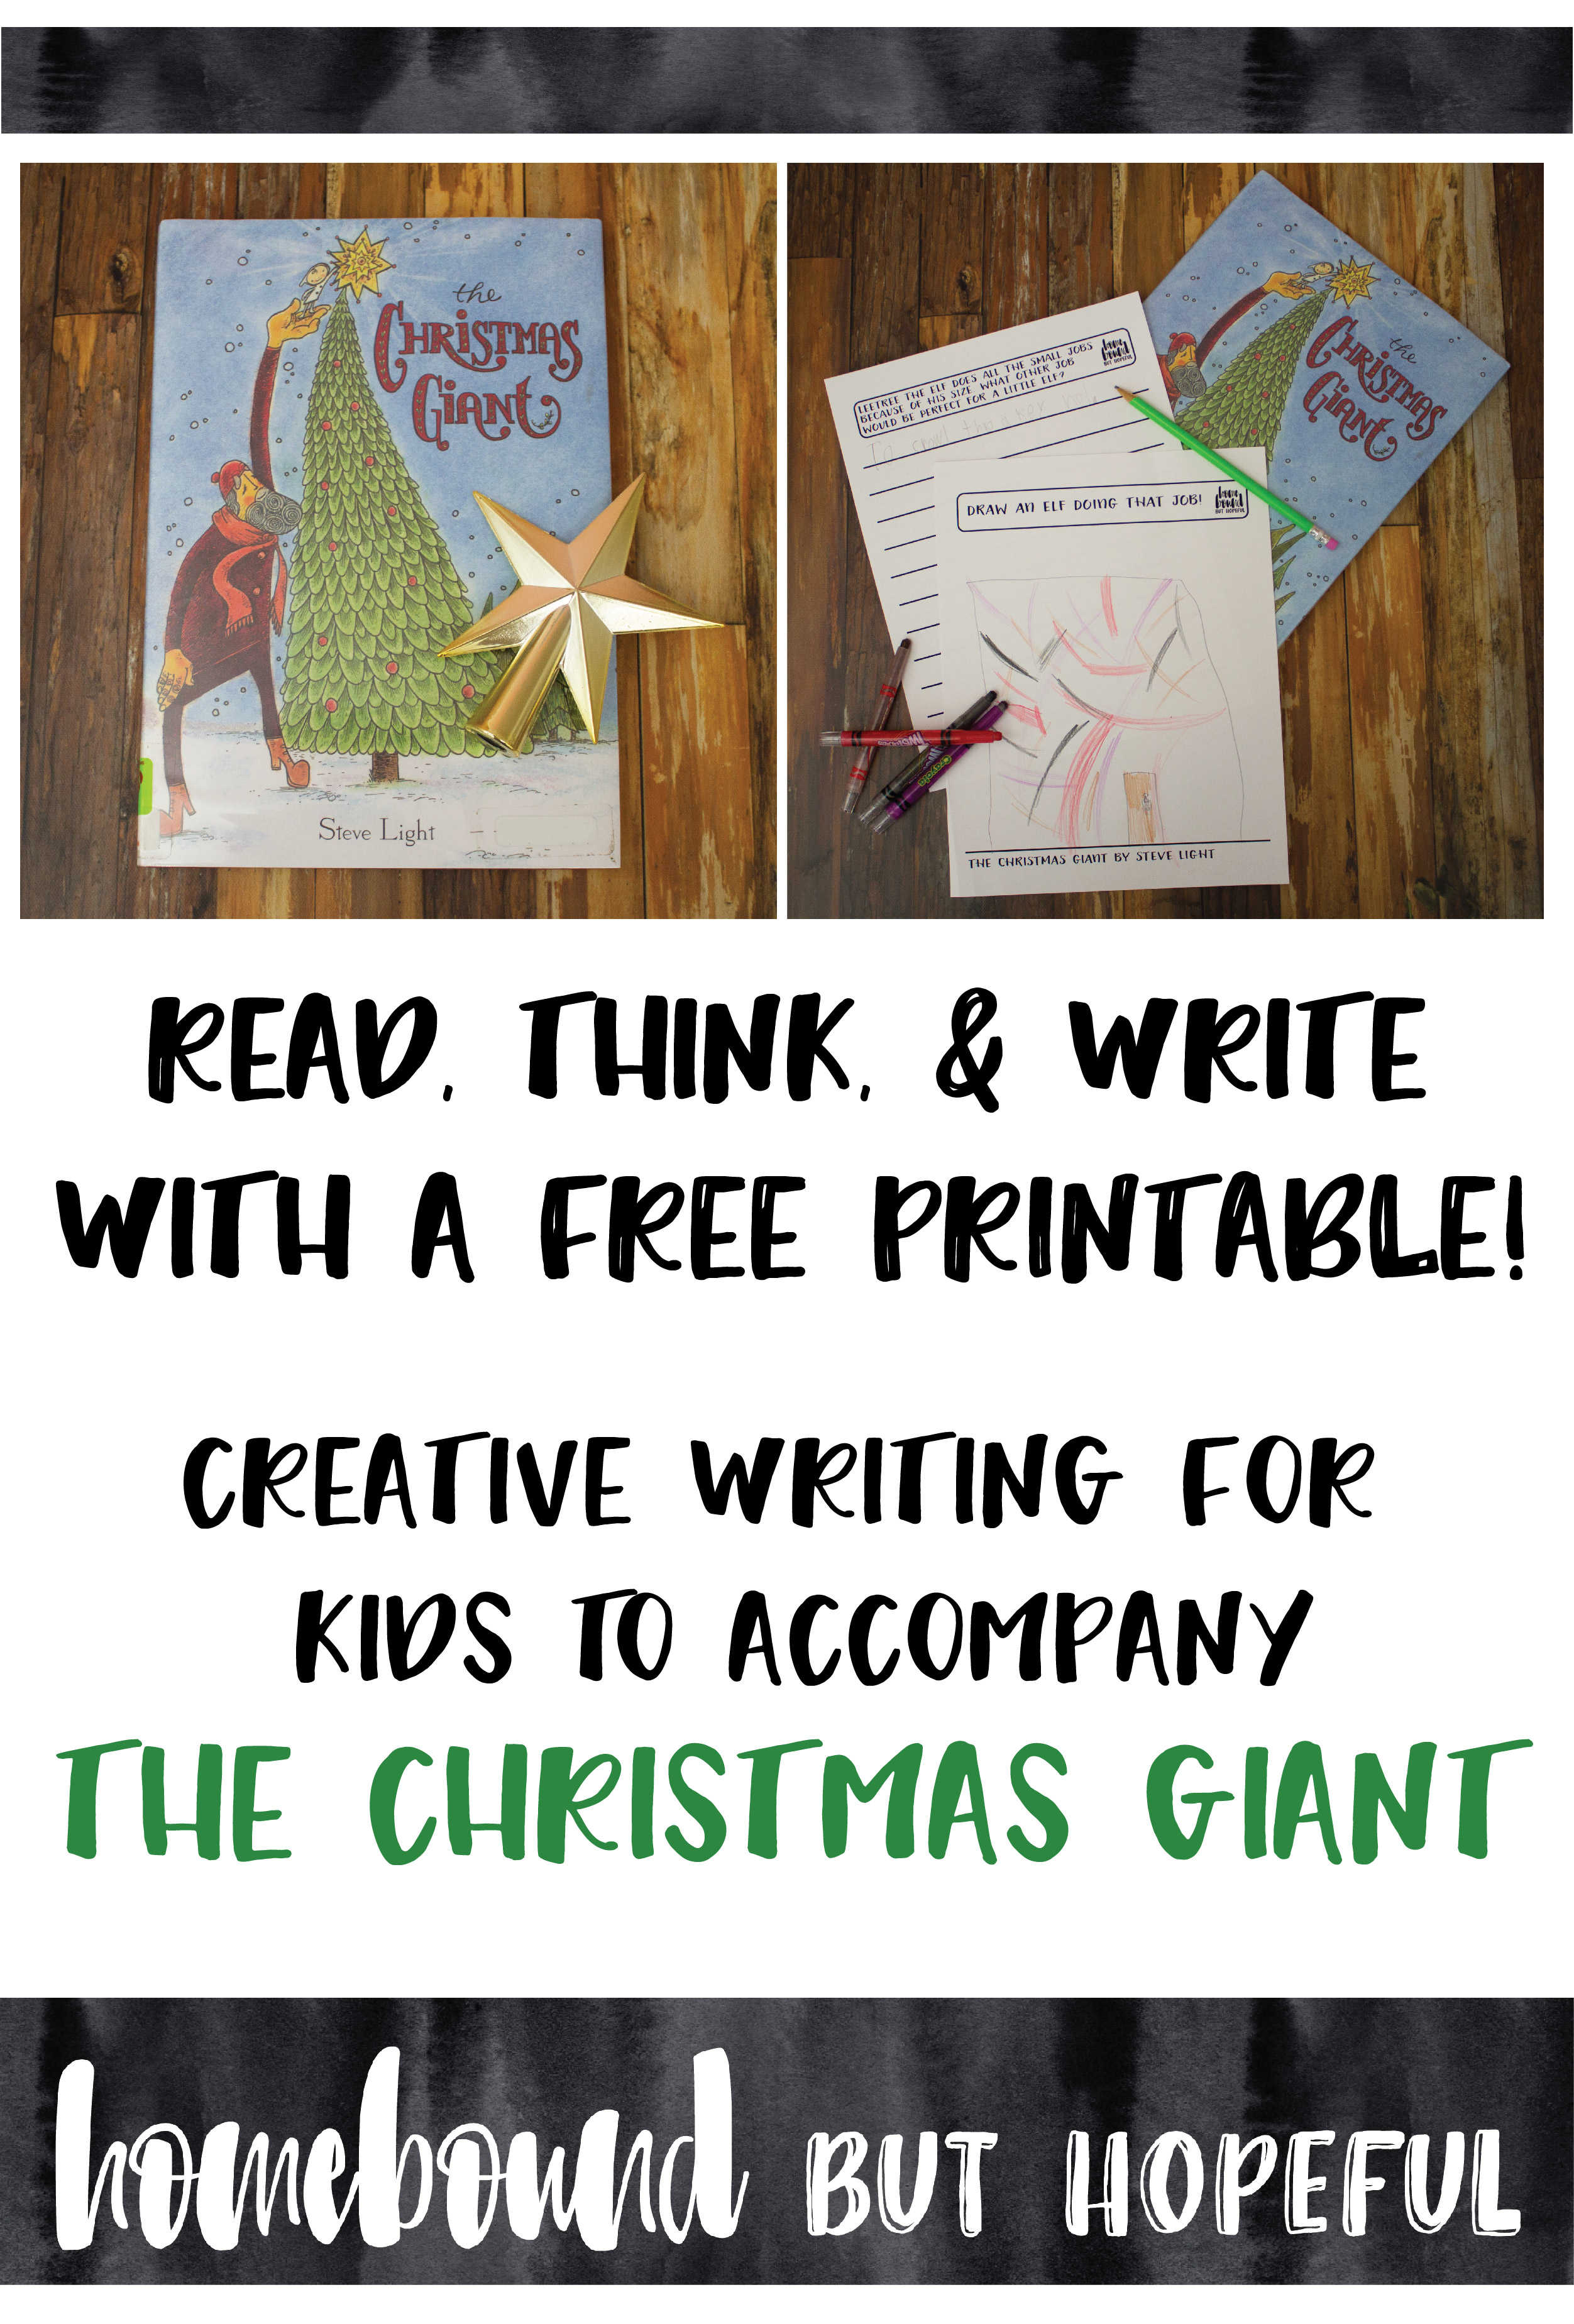 Start feeling a little festive by reading The Christmas Giant with your kids. Use the free printables to continue the fun while encouraging creative thought.